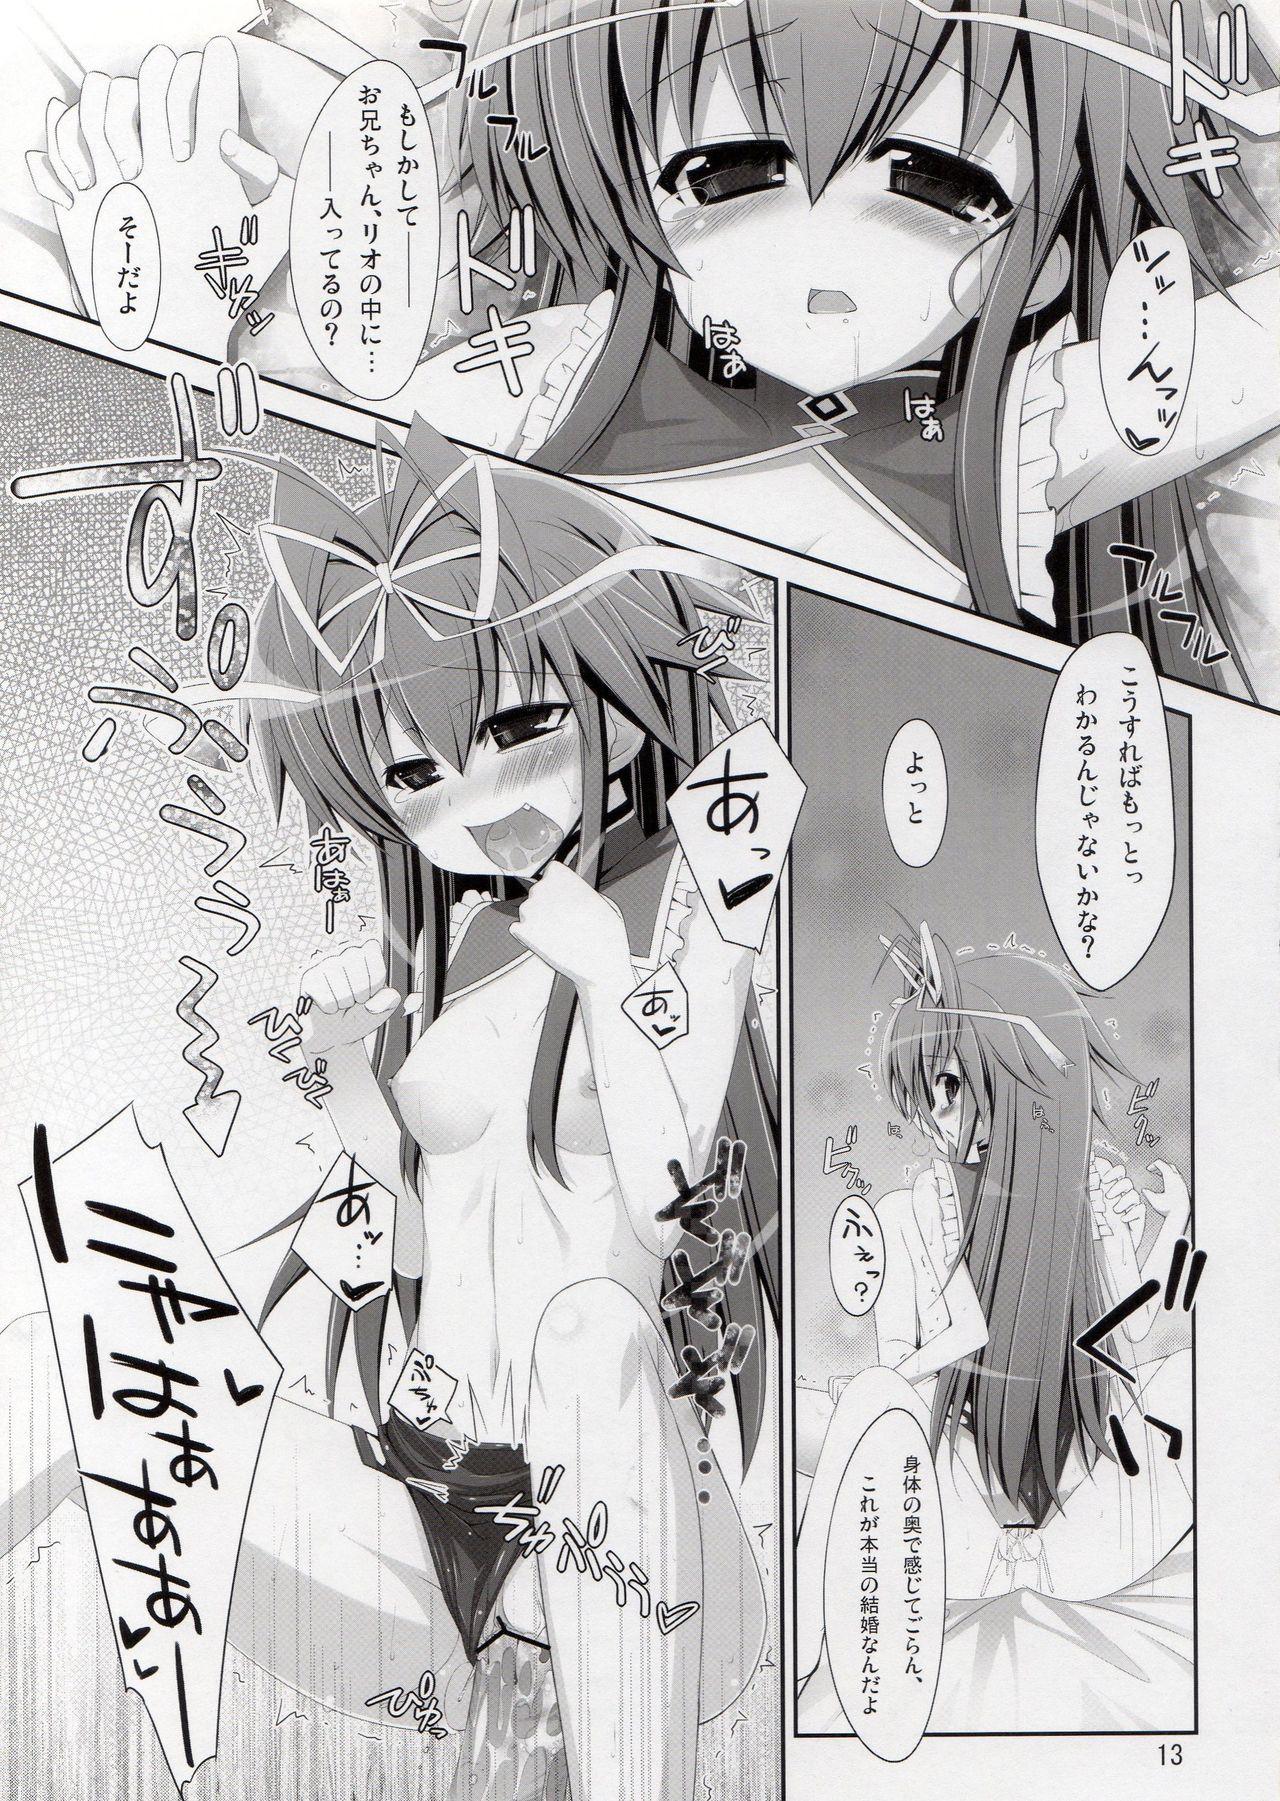 Freckles Fondness for Rio - Mahou shoujo lyrical nanoha Old Young - Page 12